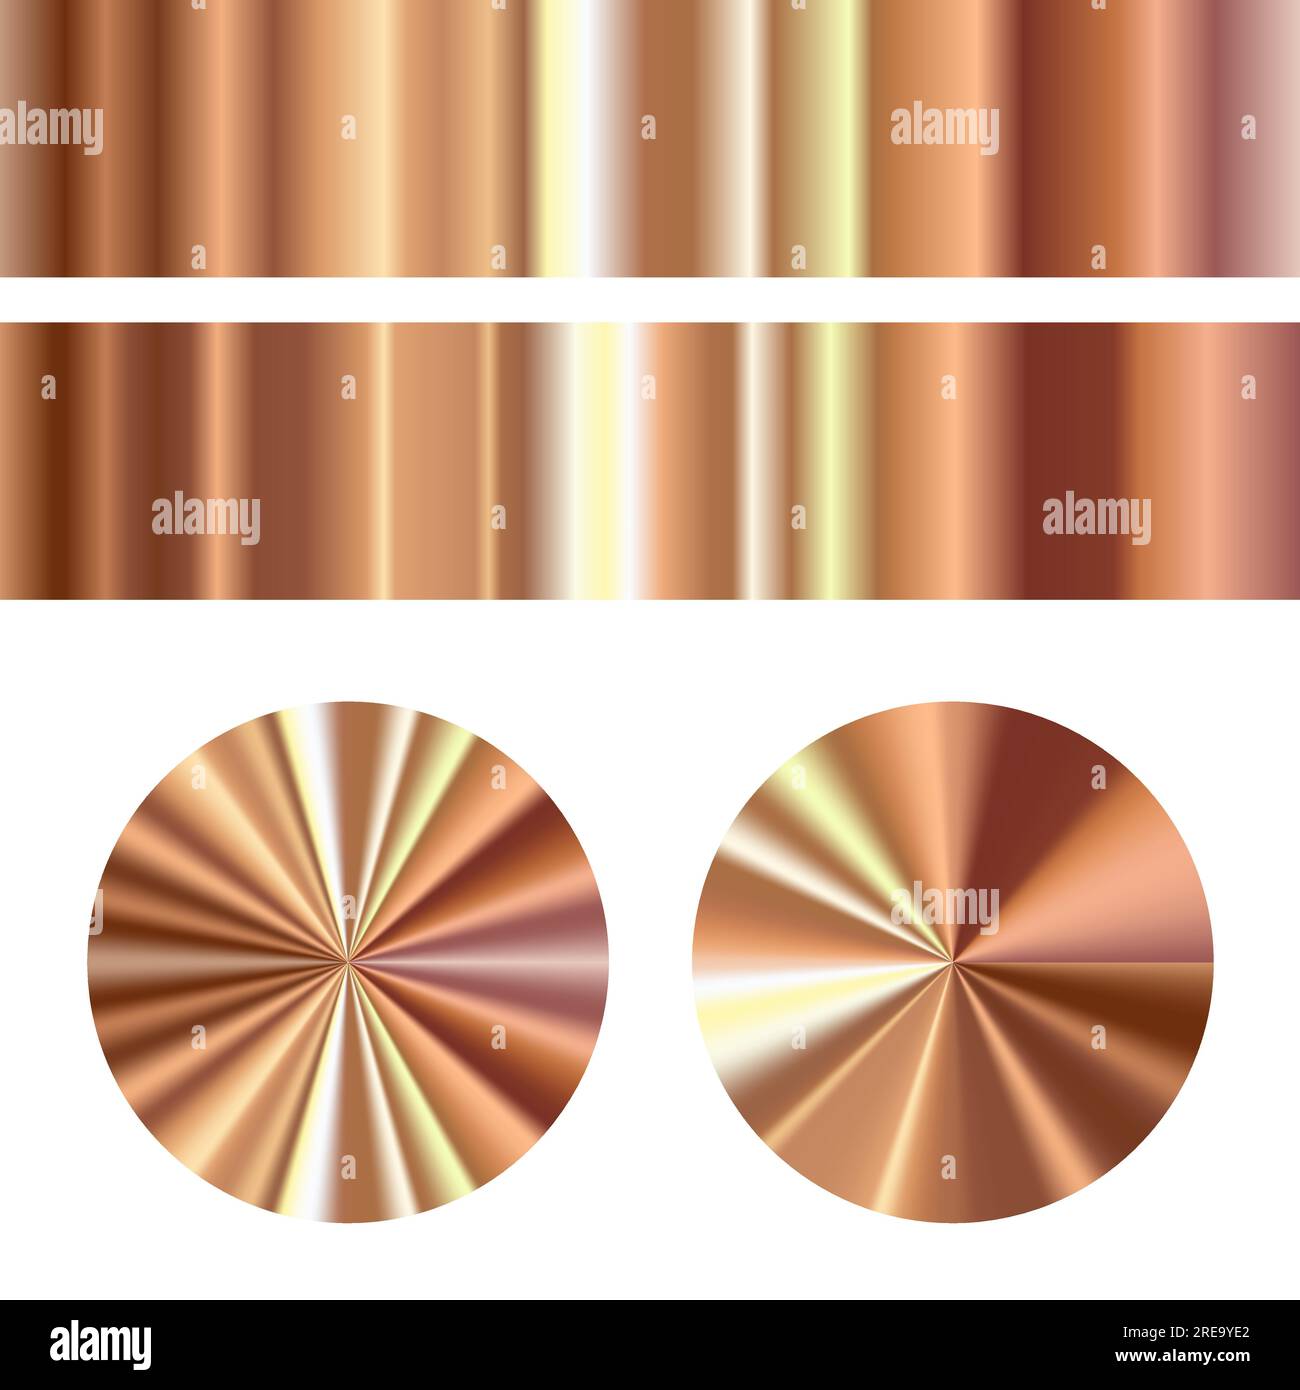 Conical Metal Gradient Collection of Golden Circles Stock Vector